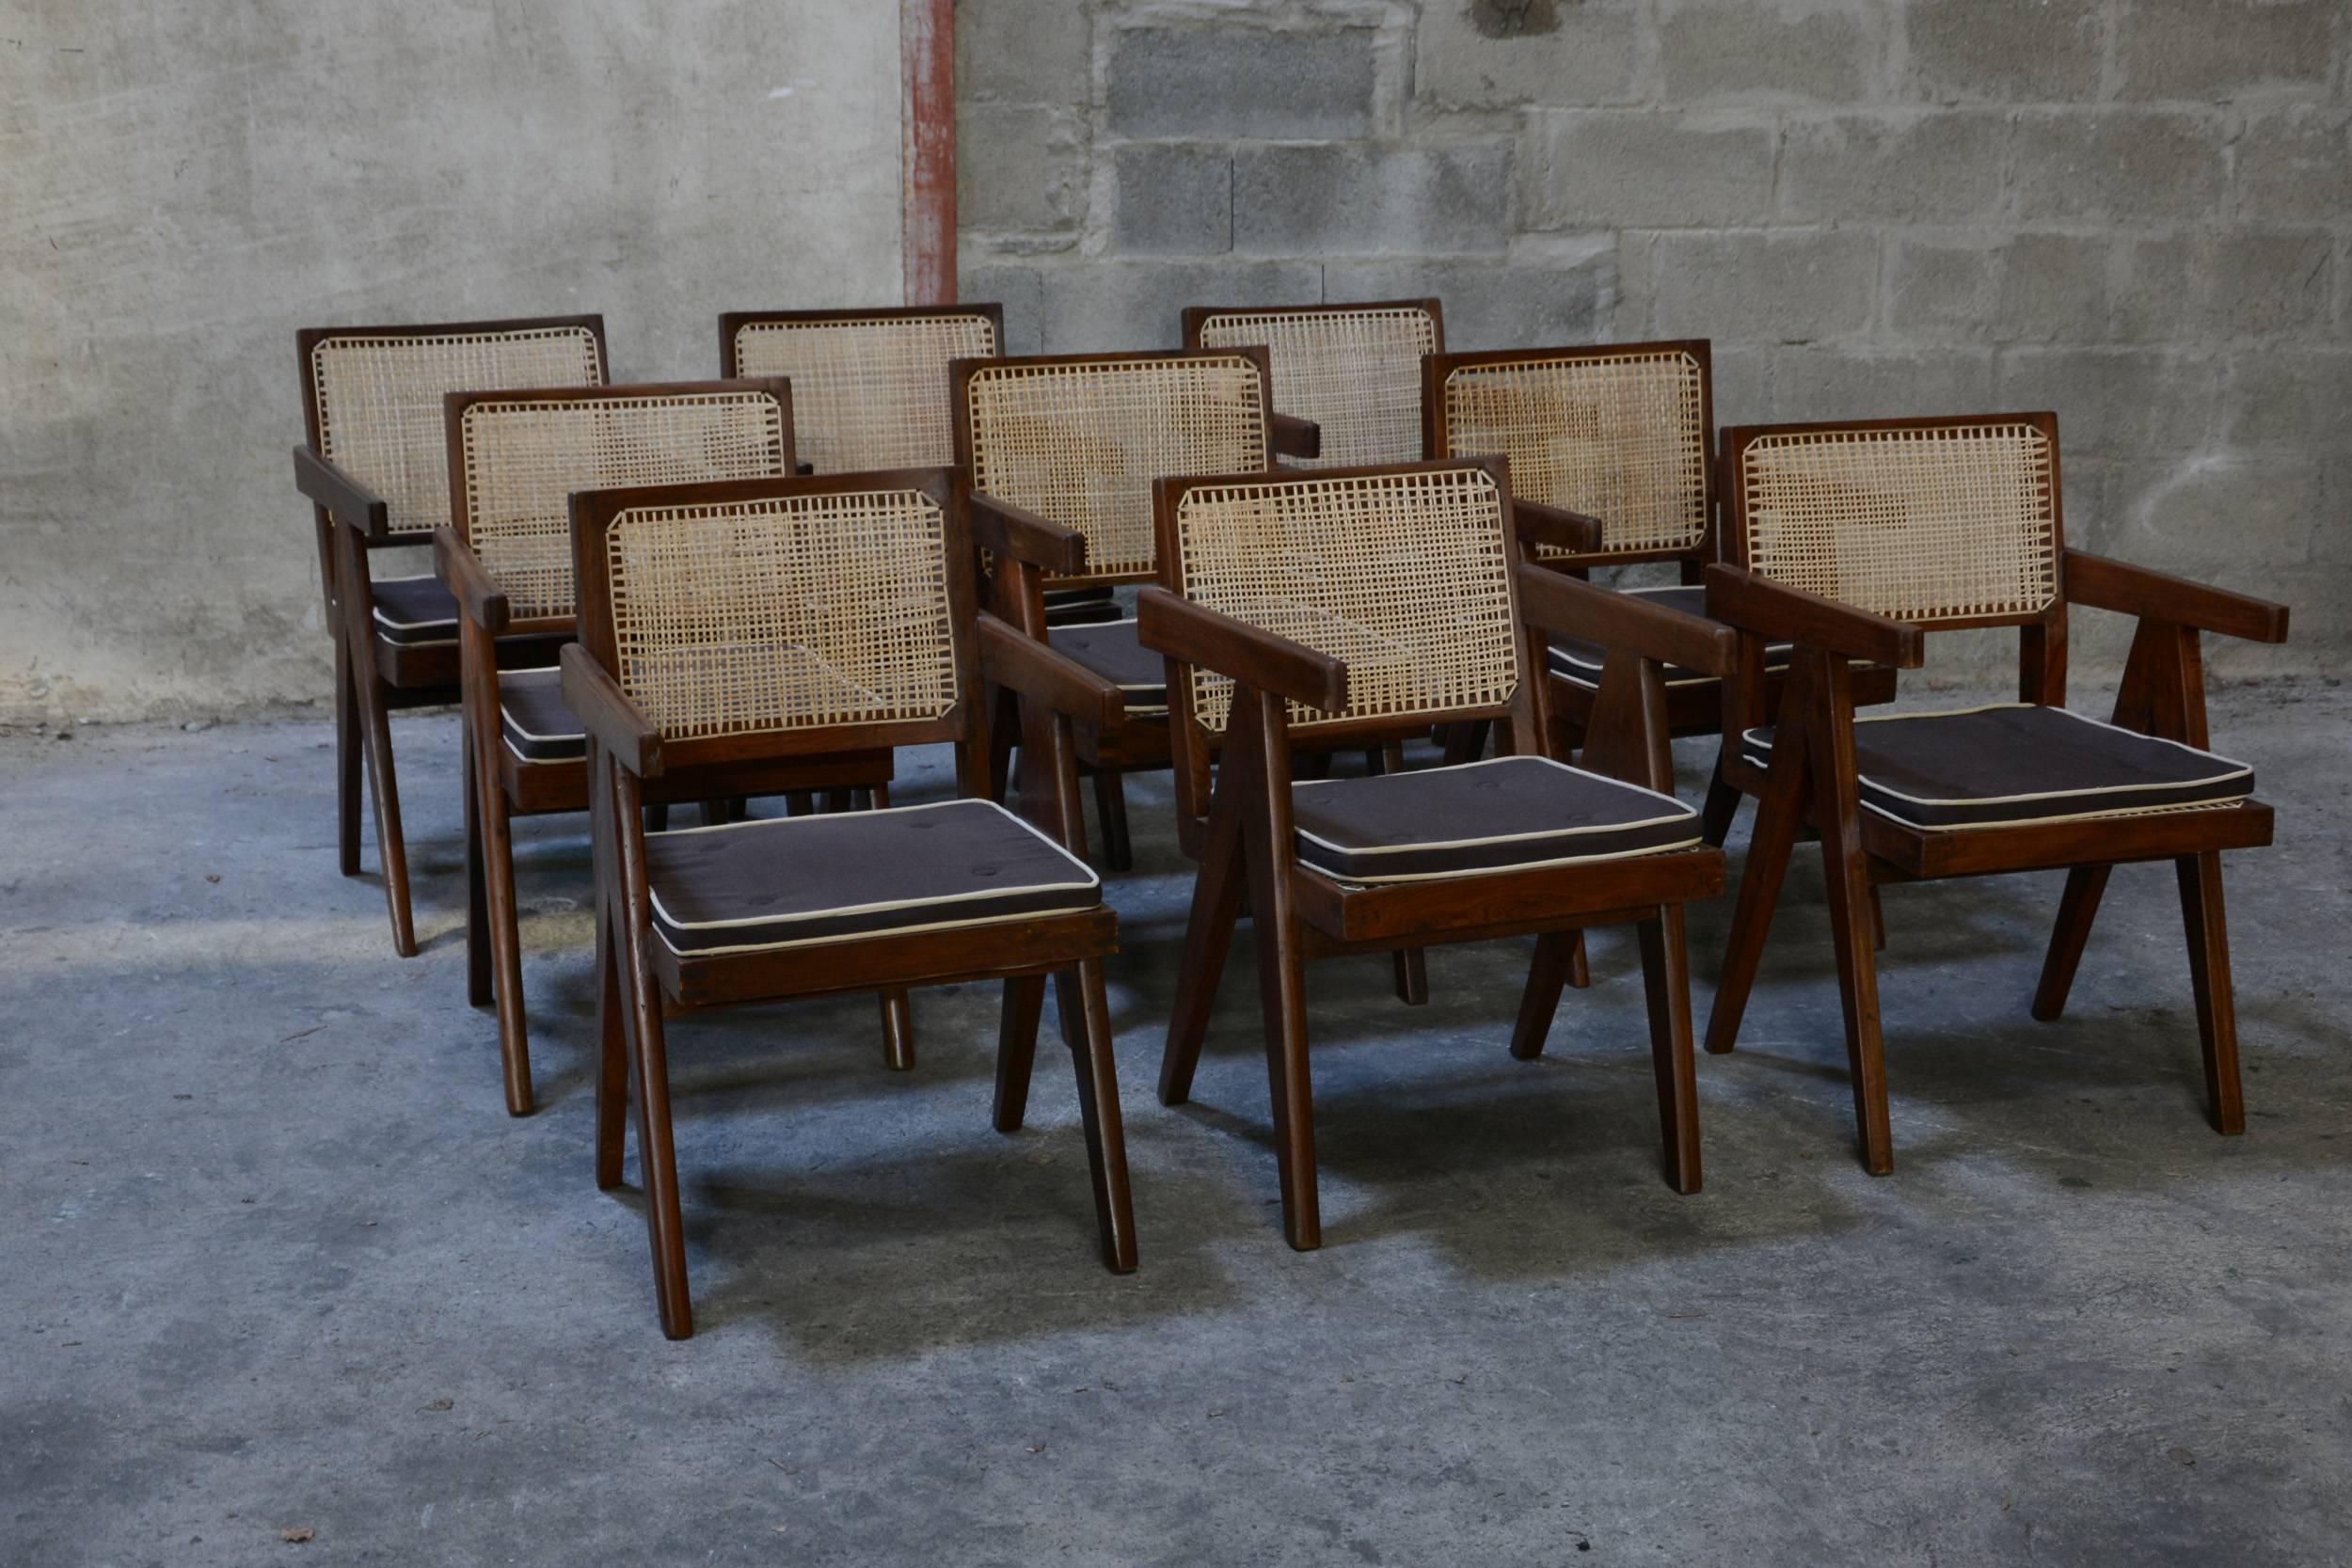 Pierre Jeanneret, very rare set of nine cane and teak wood office armchairs from administrative buildings in Chandigarh, India. Version with back jointed to the seat by large spindle pieces. Teak, woven cane and upholstered seat cushion featuring